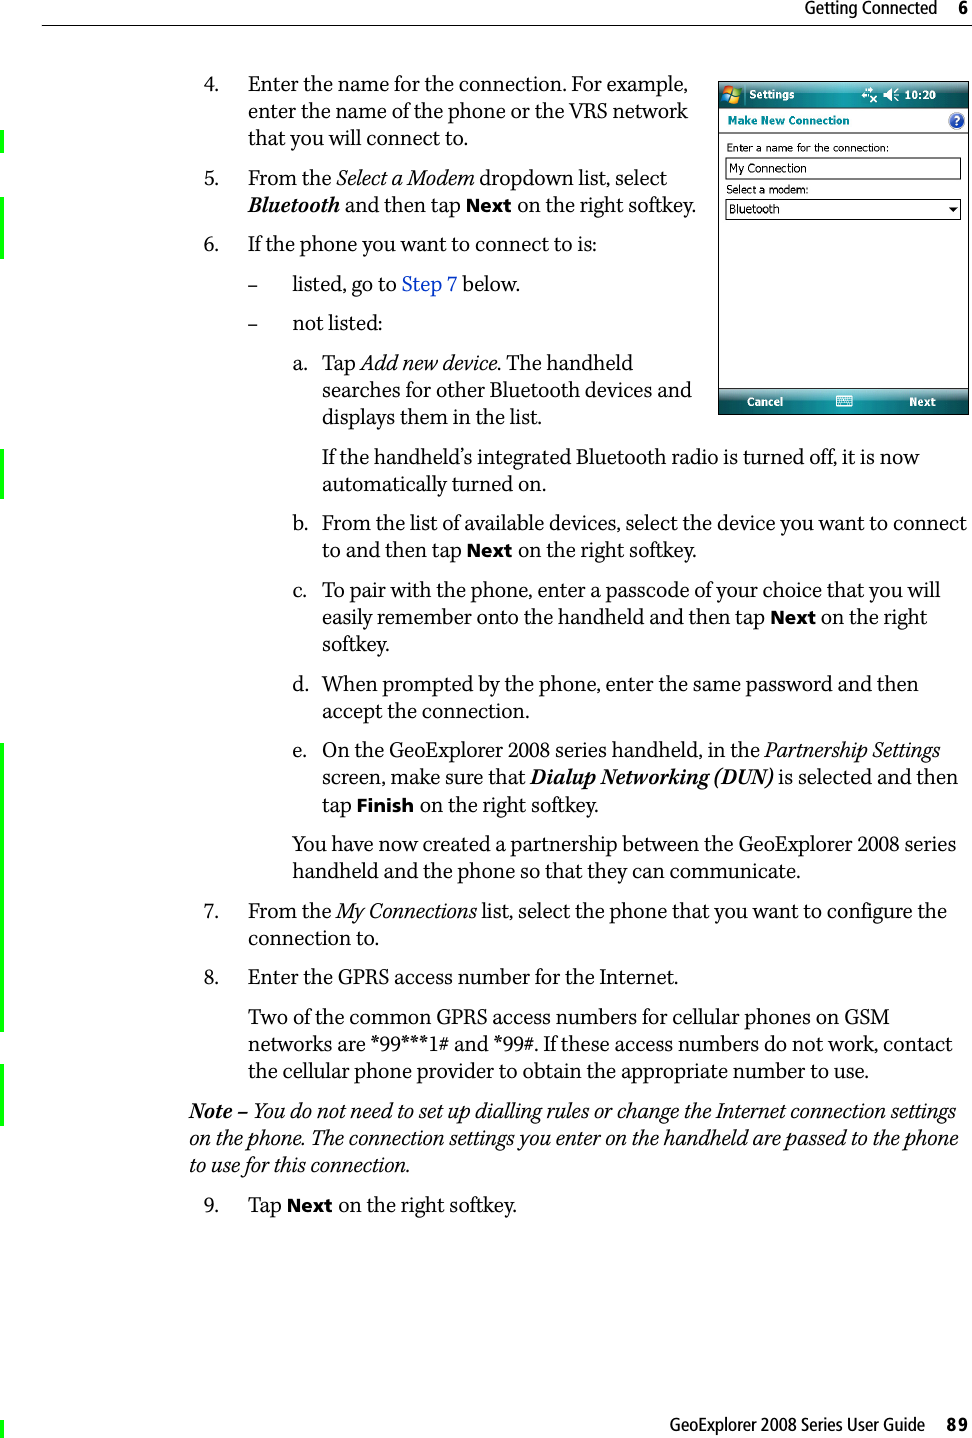 GeoExplorer 2008 Series User Guide     89Getting Connected     64. Enter the name for the connection. For example, enter the name of the phone or the VRS network that you will connect to. 5. From the Select a Modem dropdown list, select Bluetooth and then tap Next on the right softkey.6. If the phone you want to connect to is:–listed, go to Step 7 below. –not listed:a. Tap Add new device. The handheld searches for other Bluetooth devices and displays them in the list.If the handheld’s integrated Bluetooth radio is turned off, it is now automatically turned on.b. From the list of available devices, select the device you want to connect to and then tap Next on the right softkey.c. To pair with the phone, enter a passcode of your choice that you will easily remember onto the handheld and then tap Next on the right softkey.d. When prompted by the phone, enter the same password and then accept the connection.e. On the GeoExplorer 2008 series handheld, in the Partnership Settings screen, make sure that Dialup Networking (DUN) is selected and then tap Finish on the right softkey.You have now created a partnership between the GeoExplorer 2008 series handheld and the phone so that they can communicate.7. From the My Connections list, select the phone that you want to configure the connection to.8. Enter the GPRS access number for the Internet. Two of the common GPRS access numbers for cellular phones on GSM networks are *99***1# and *99#. If these access numbers do not work, contact the cellular phone provider to obtain the appropriate number to use.Note – You do not need to set up dialling rules or change the Internet connection settings on the phone. The connection settings you enter on the handheld are passed to the phone to use for this connection.9. Tap Next on the right softkey. 